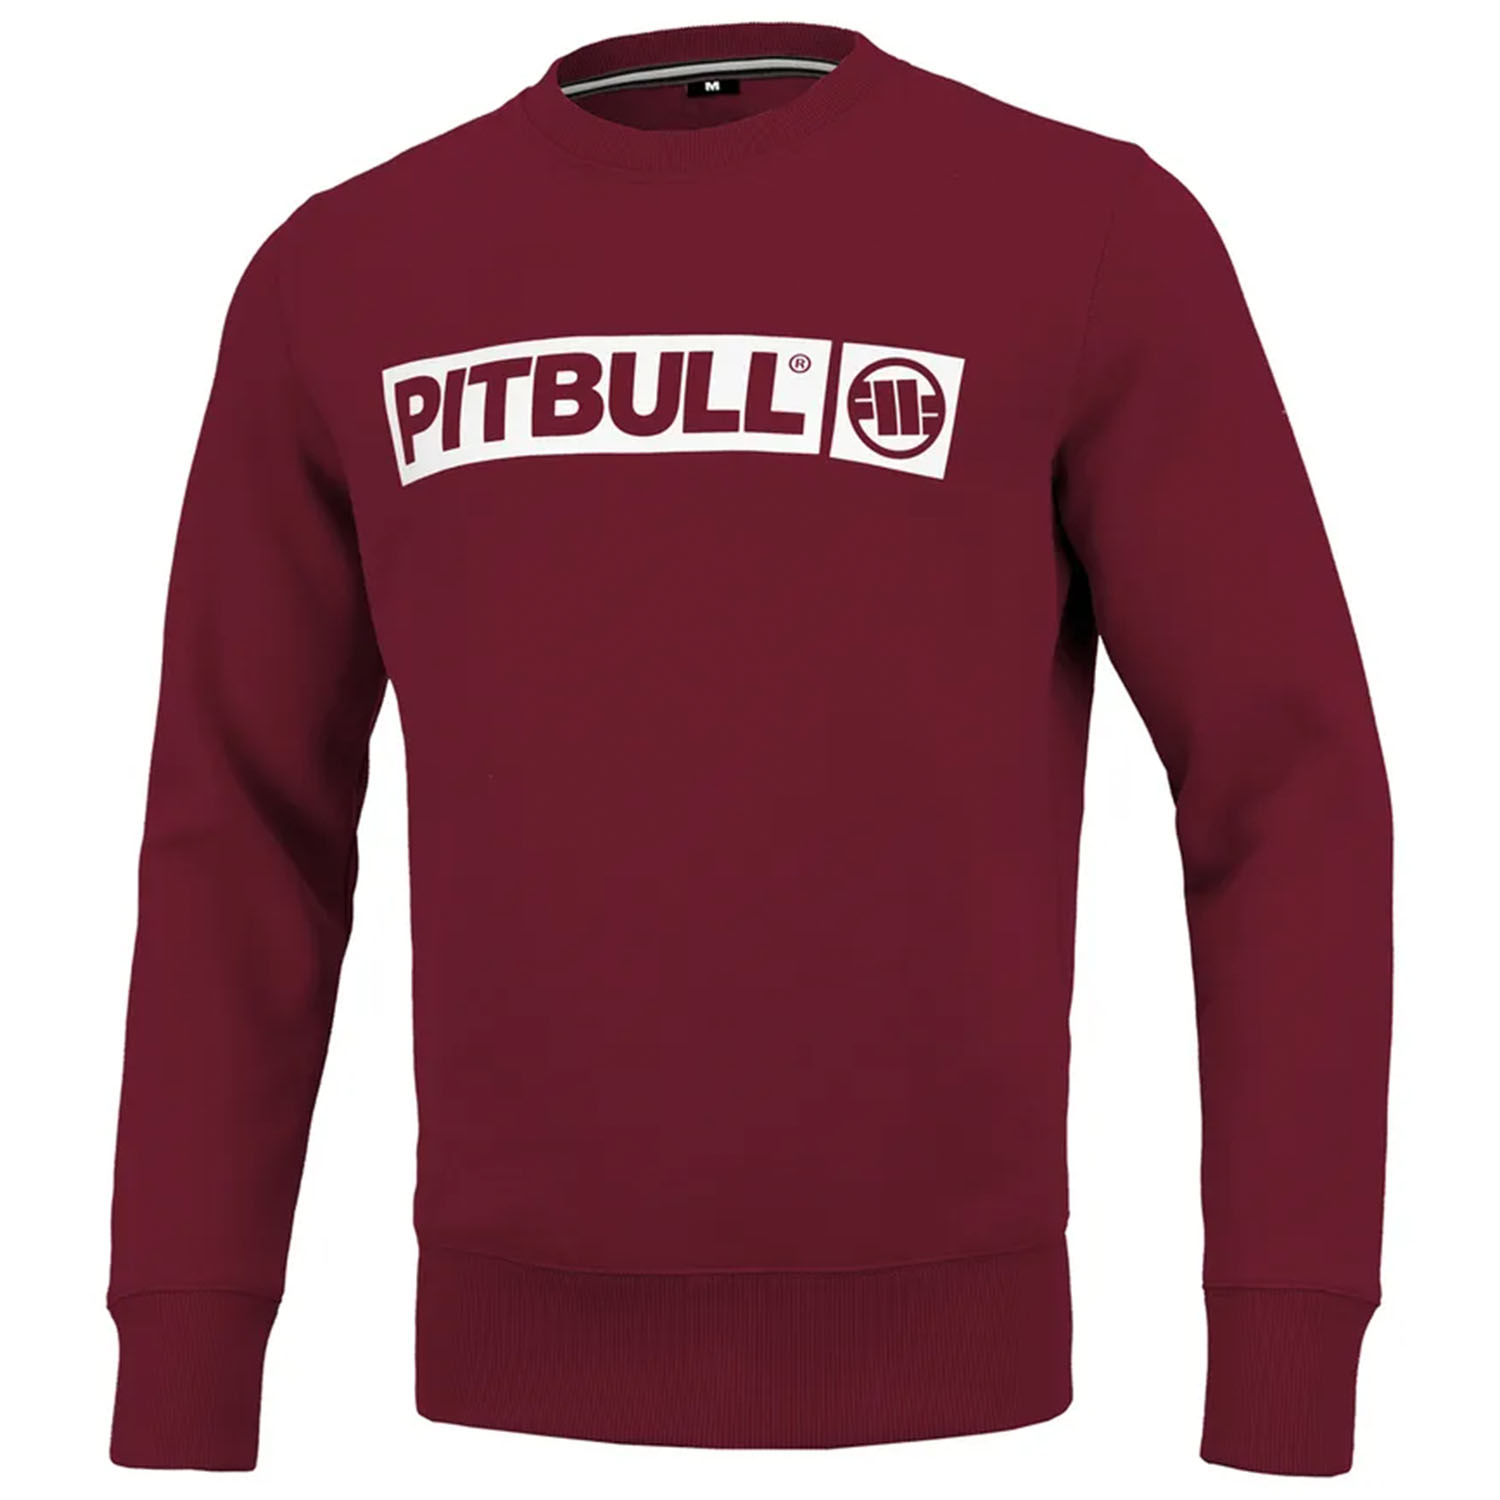 Pit Bull West Coast Pullover, Terry Hilltop, weinrot, M